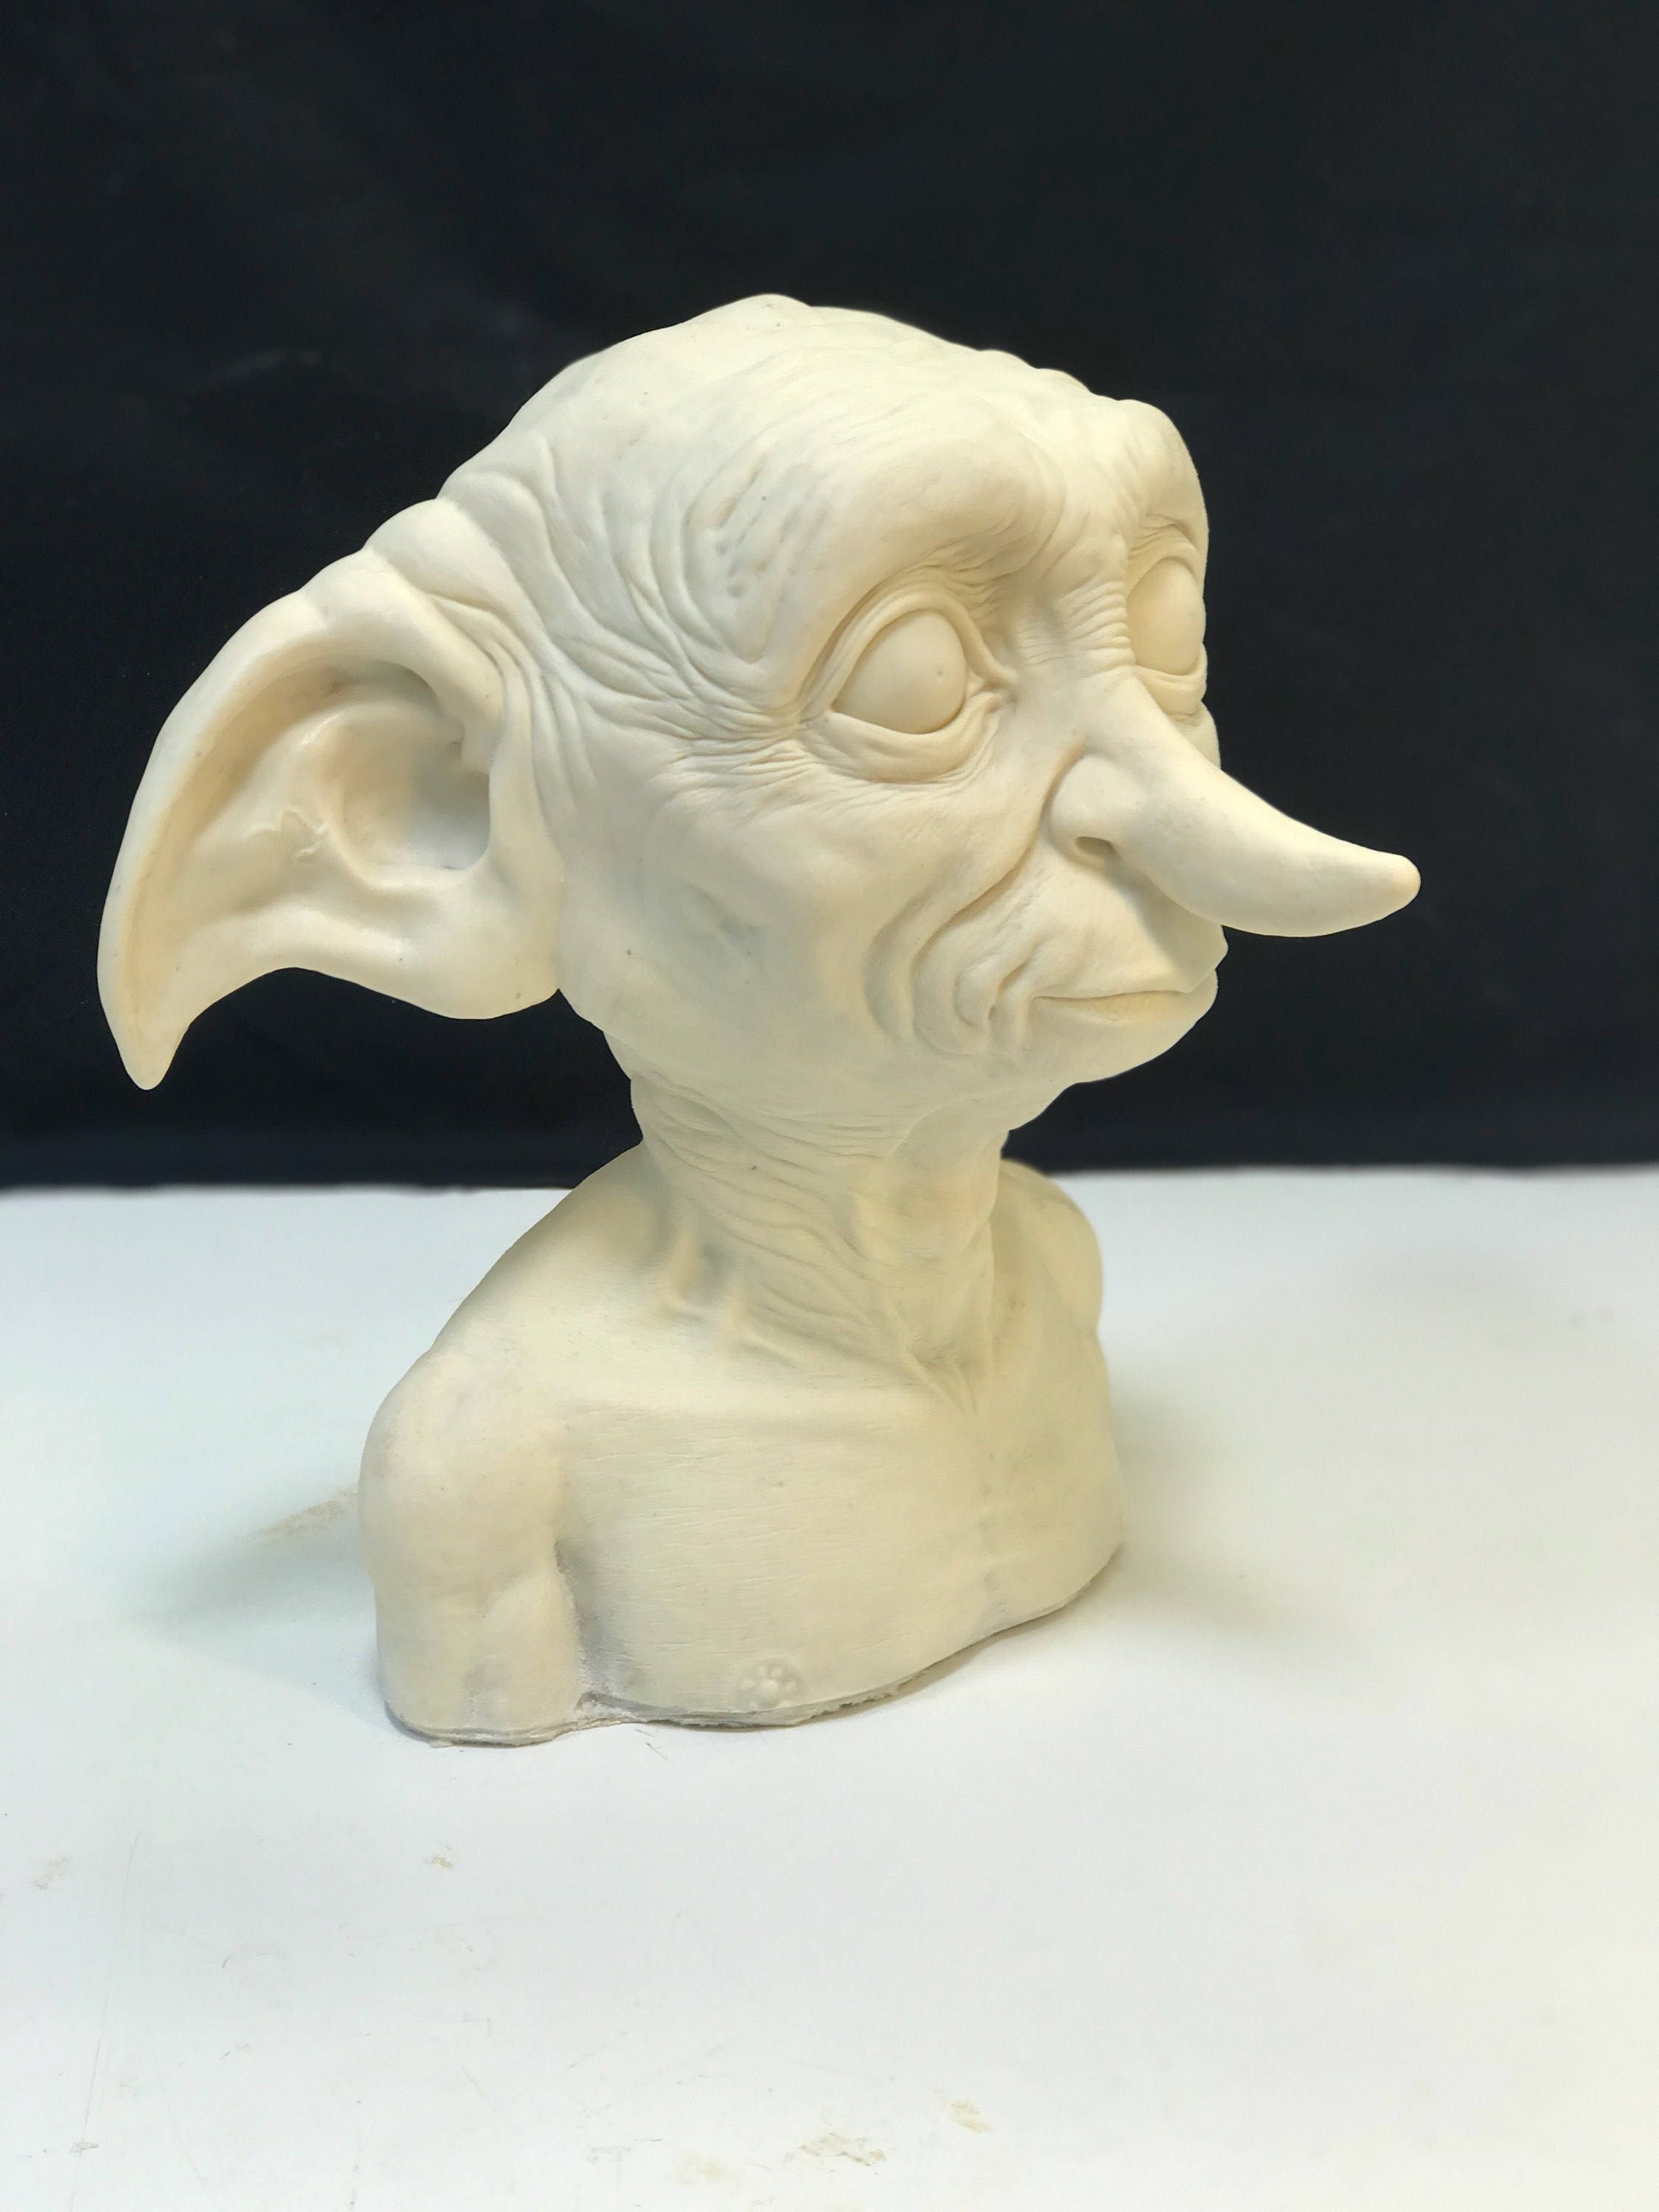 Sculpting Dobby - Harry Potter special - timelapse sculpt and